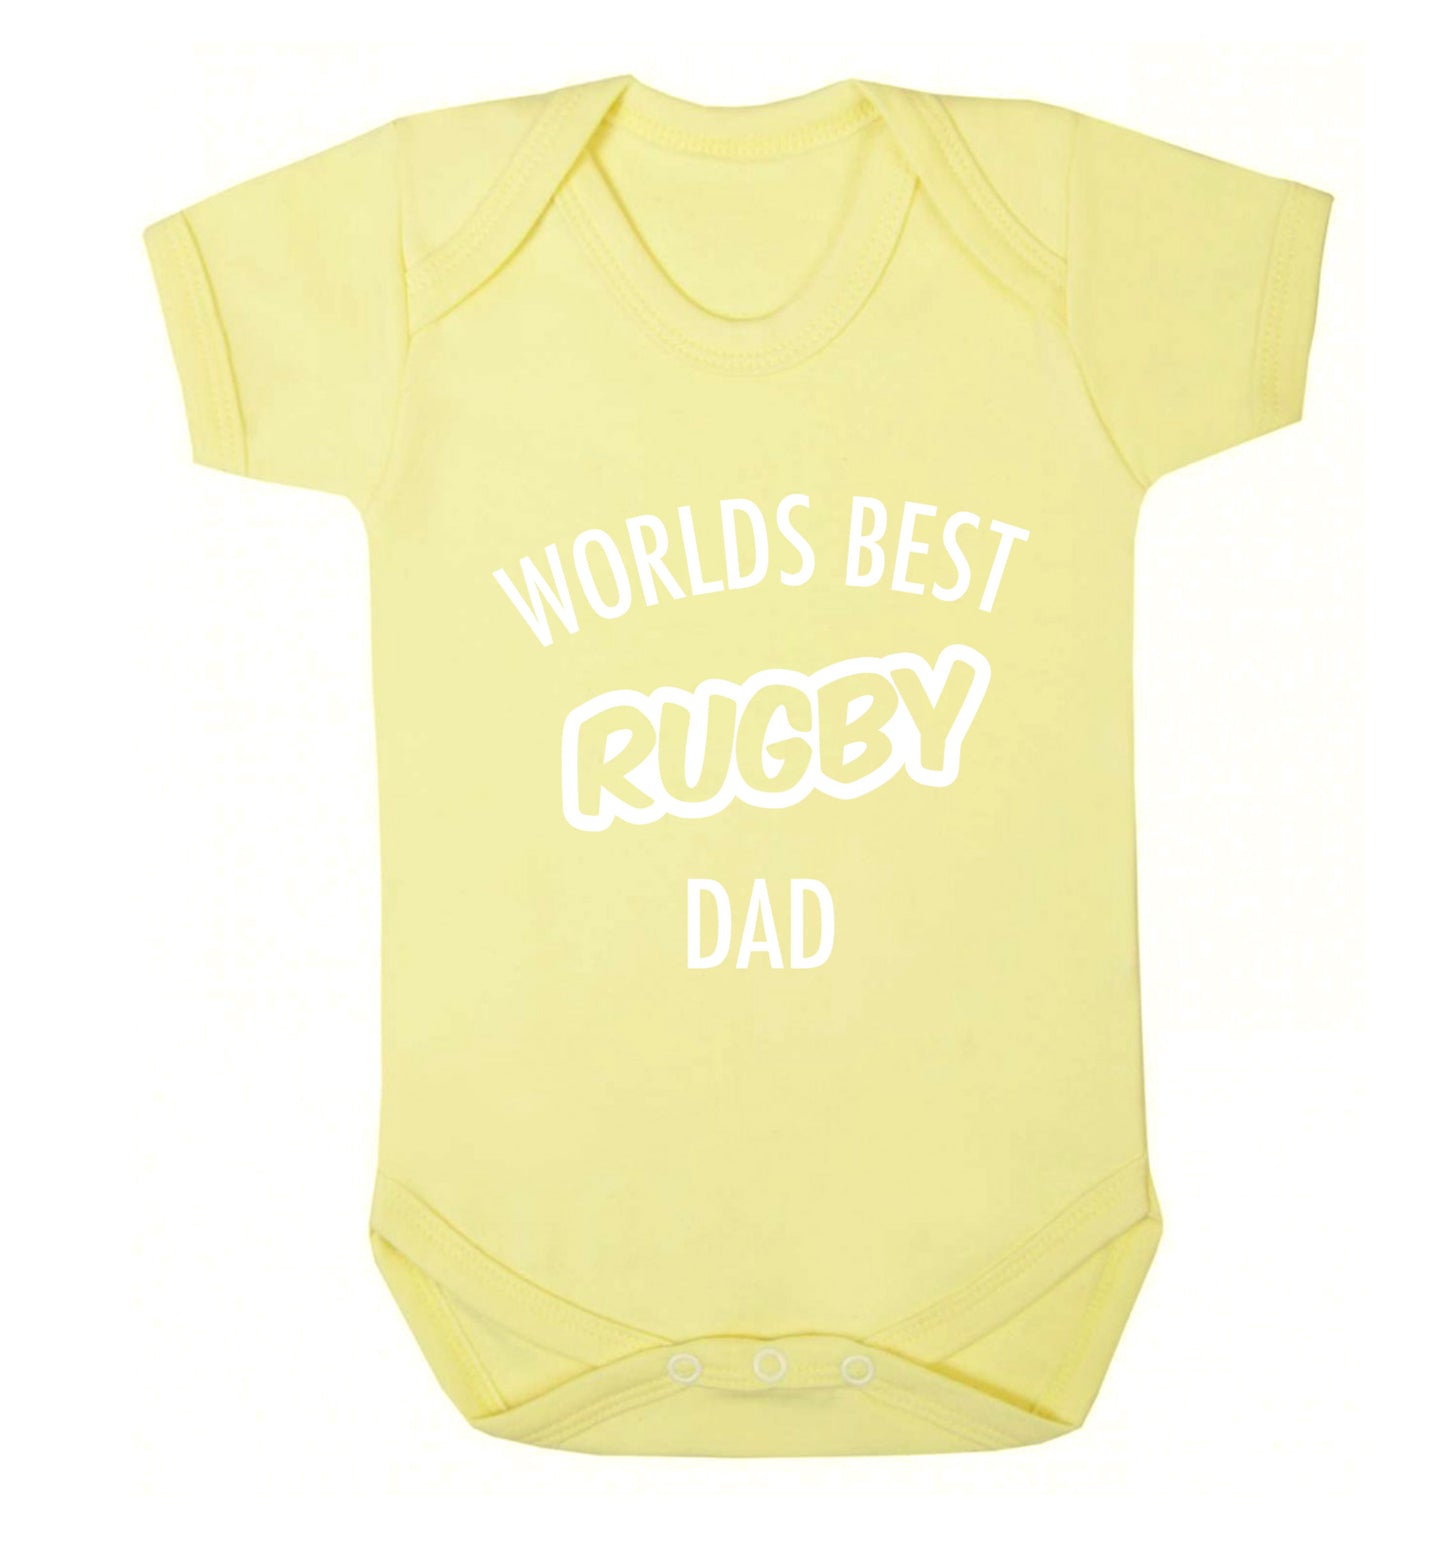 Worlds best rugby dad Baby Vest pale yellow 18-24 months